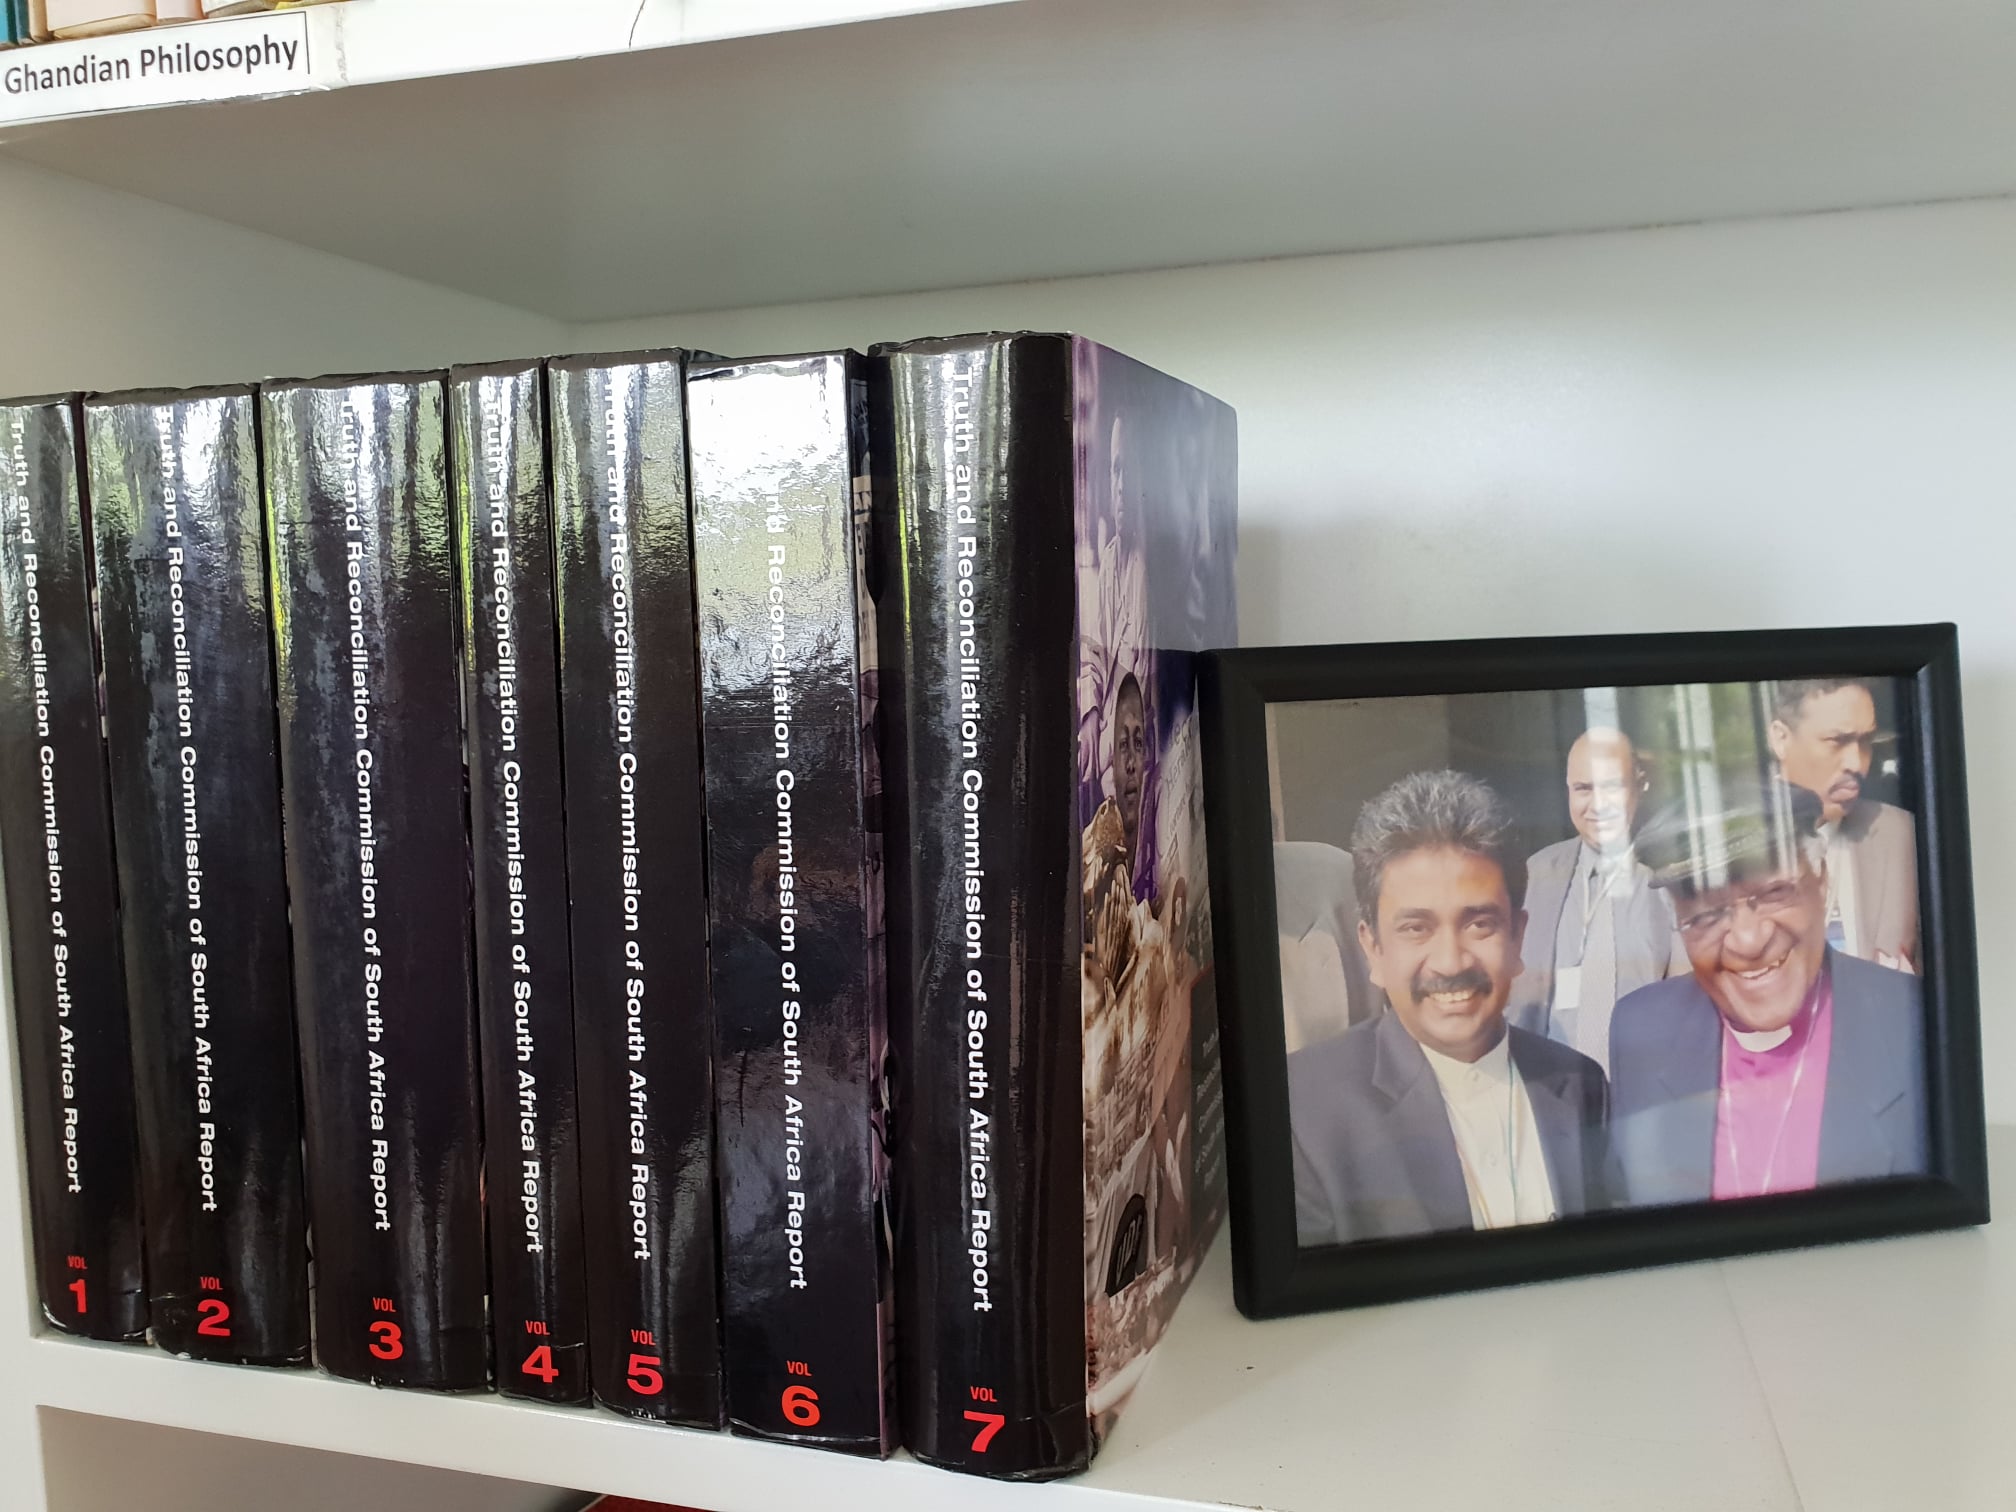 7 Volume set of the Truth and Reconciliation SIHL PEACE LIBRARY RECEIVED THE Truth and Reconciliation Commission Report of South Africa from a former Sri Lankan Ambassador to South Africa.